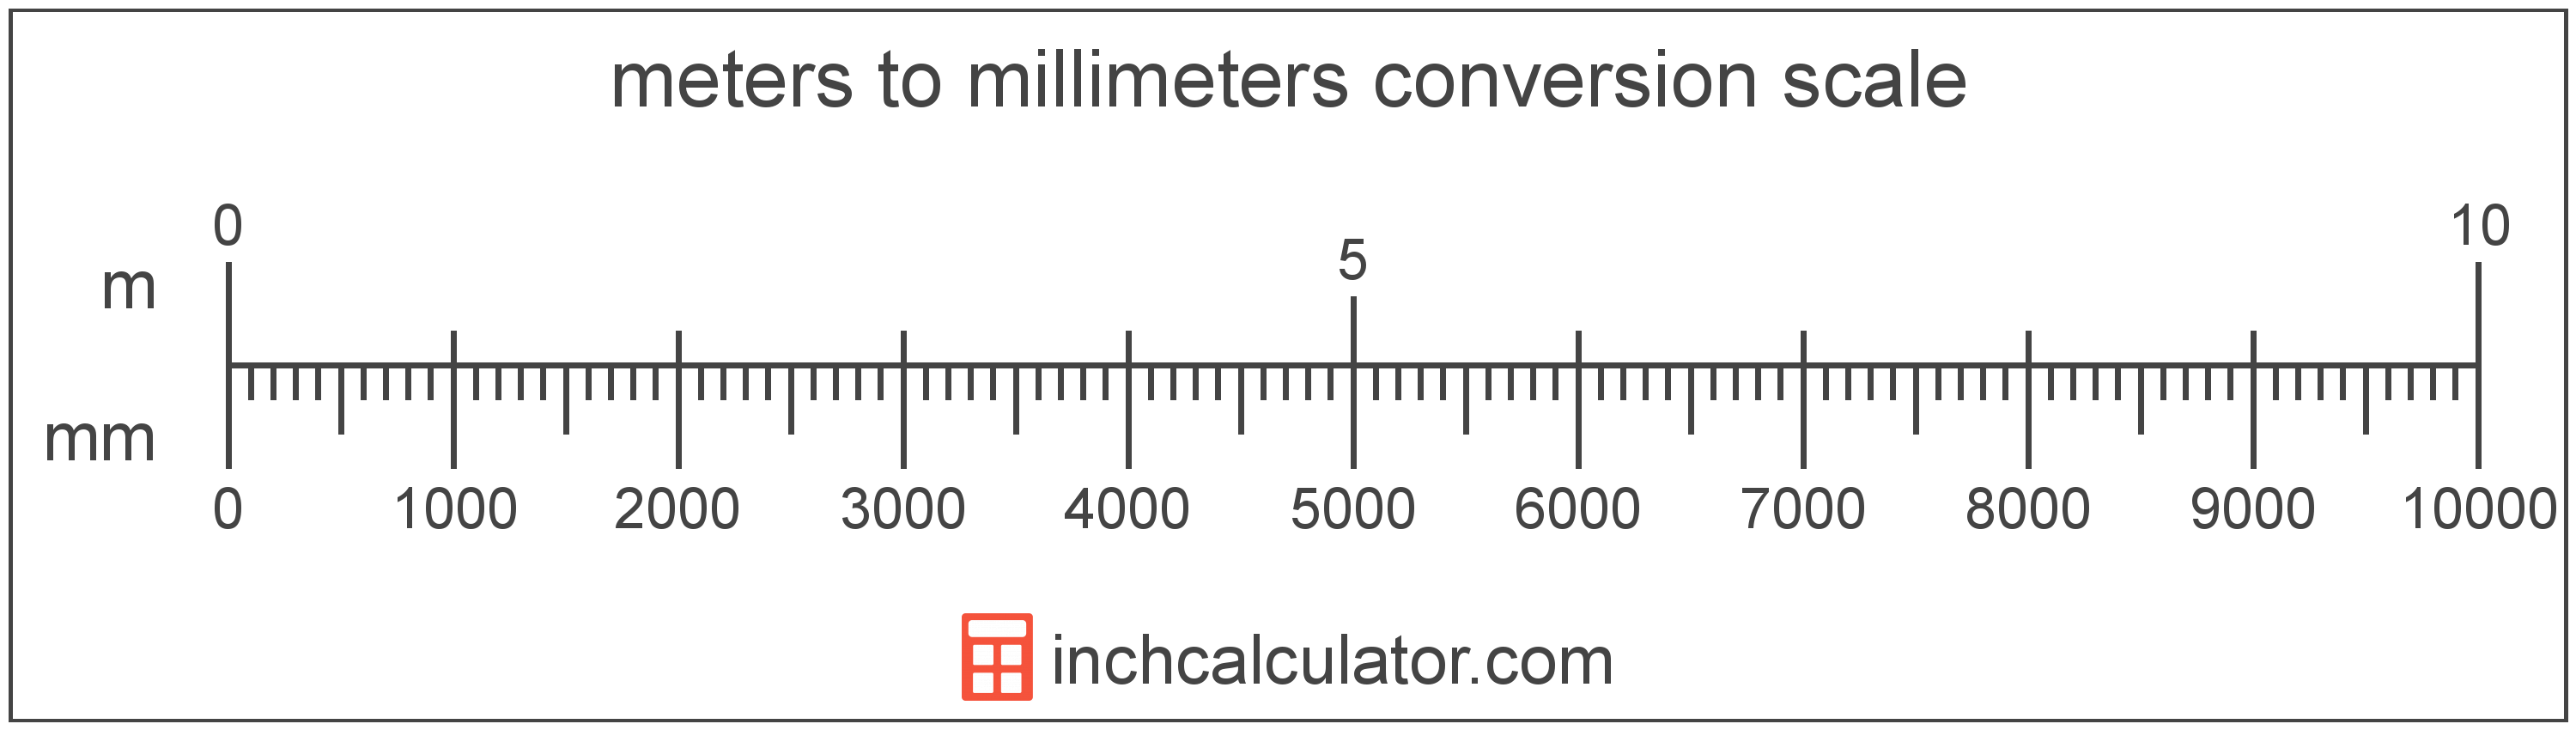 millimeters-to-meters-conversion-mm-to-m-inch-calculator